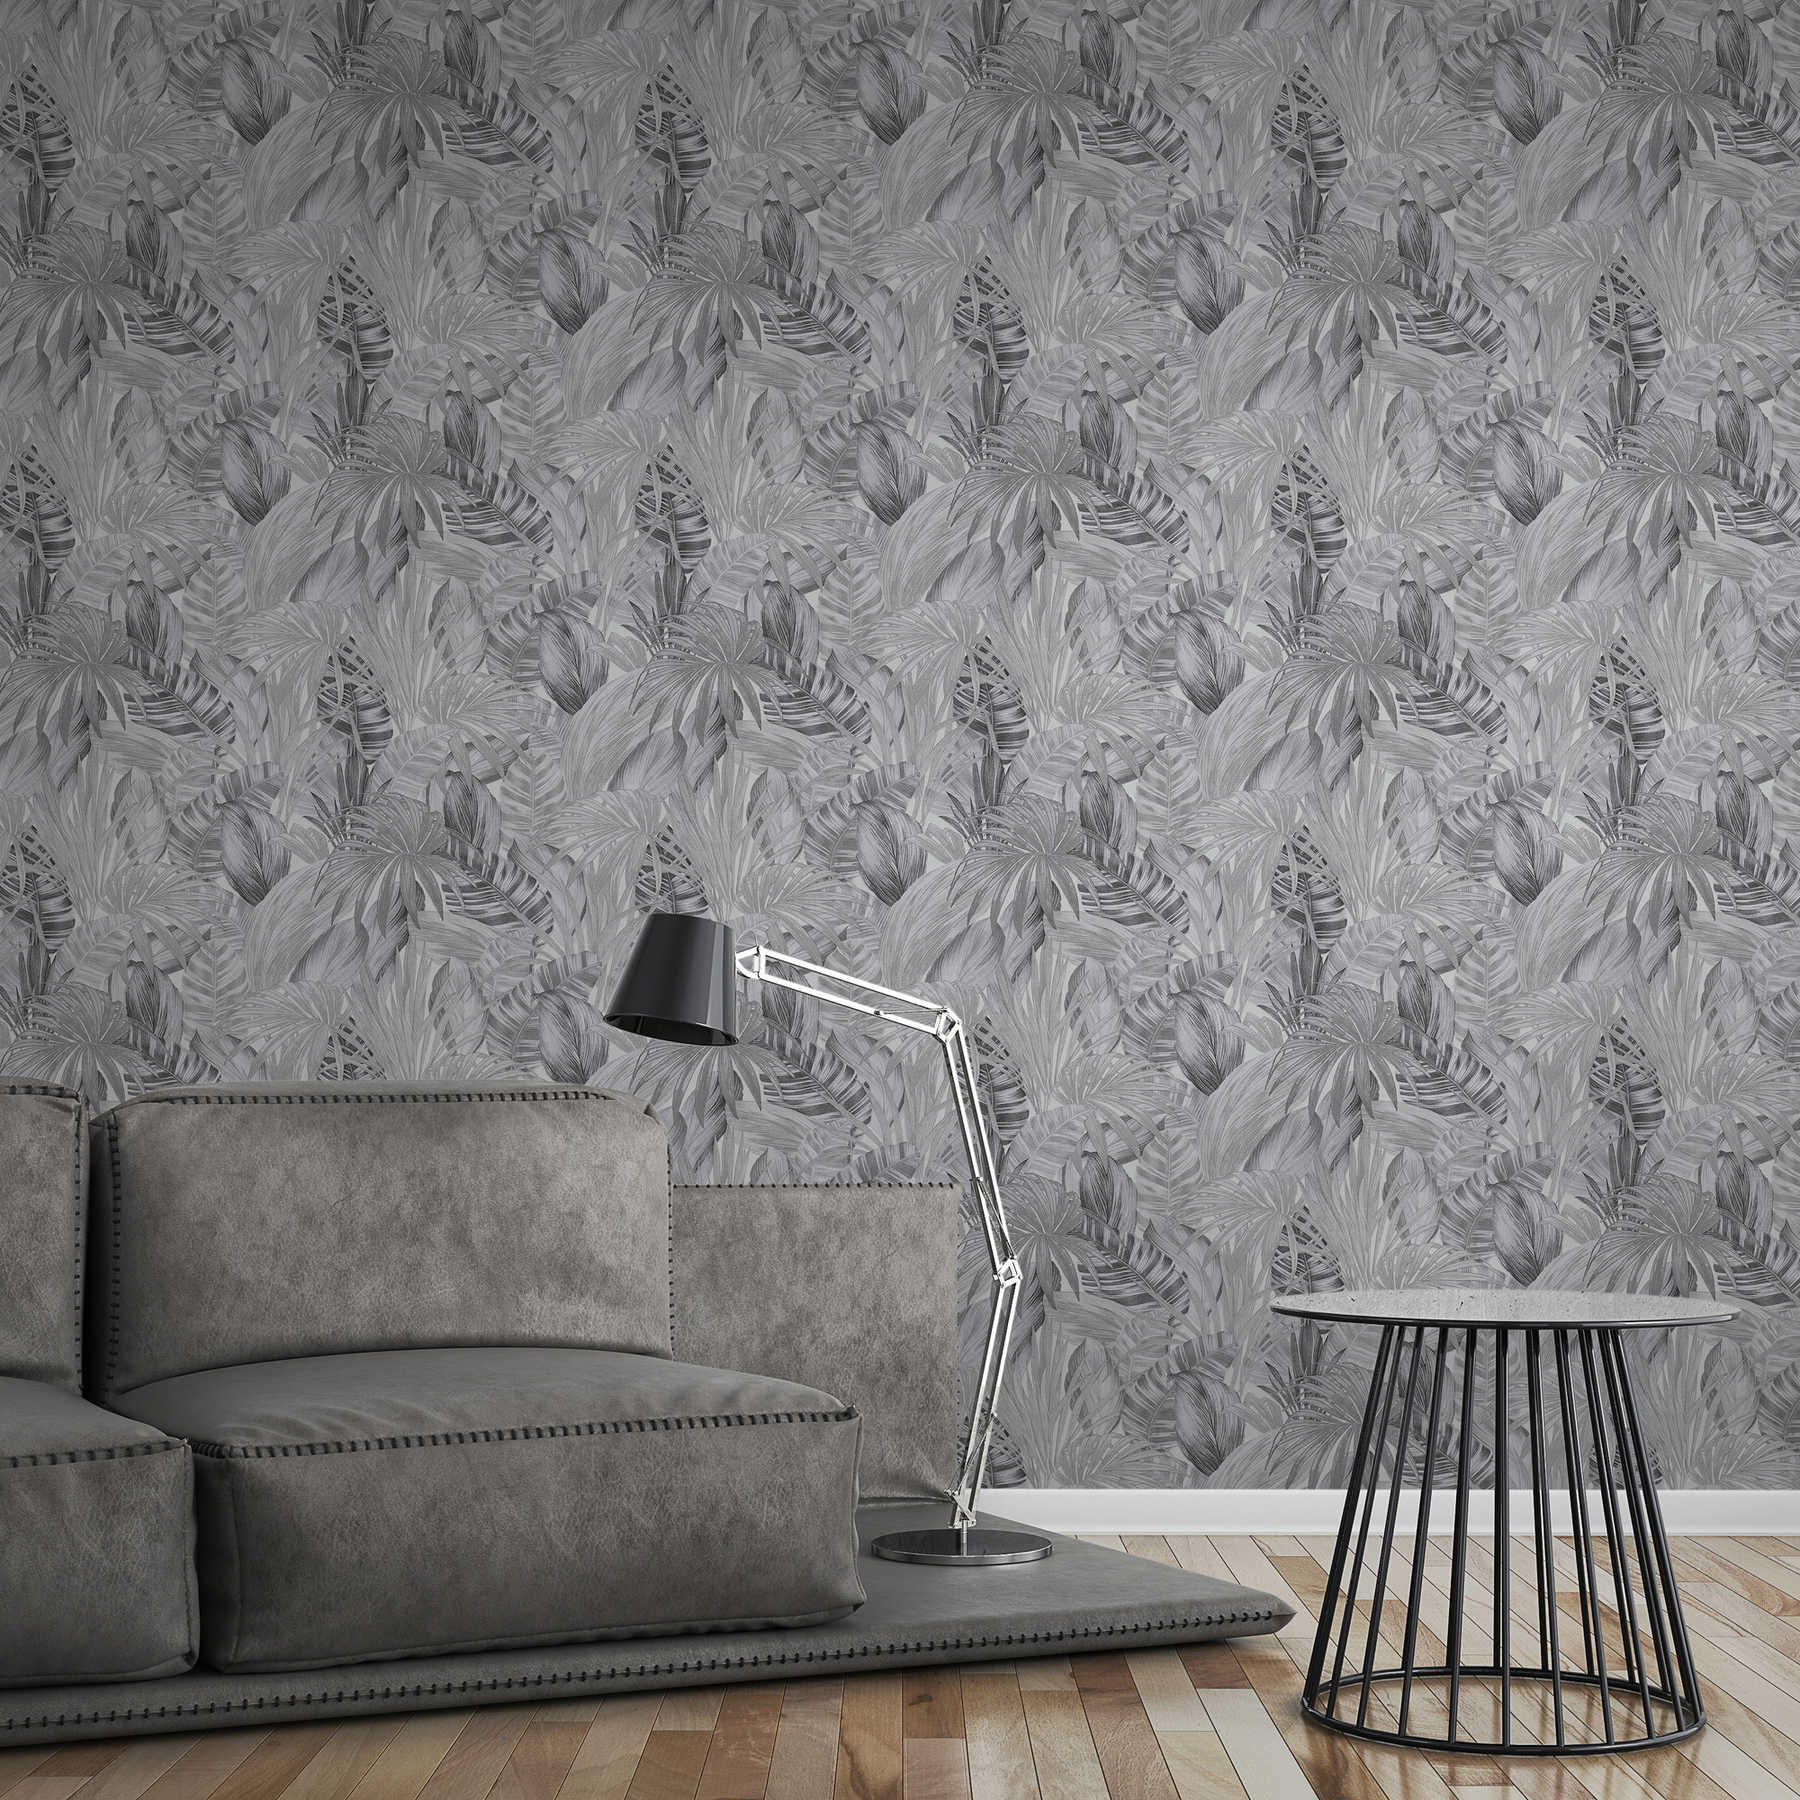             Pattern wallpaper with leaf motif in drawing style - black, white, grey
        